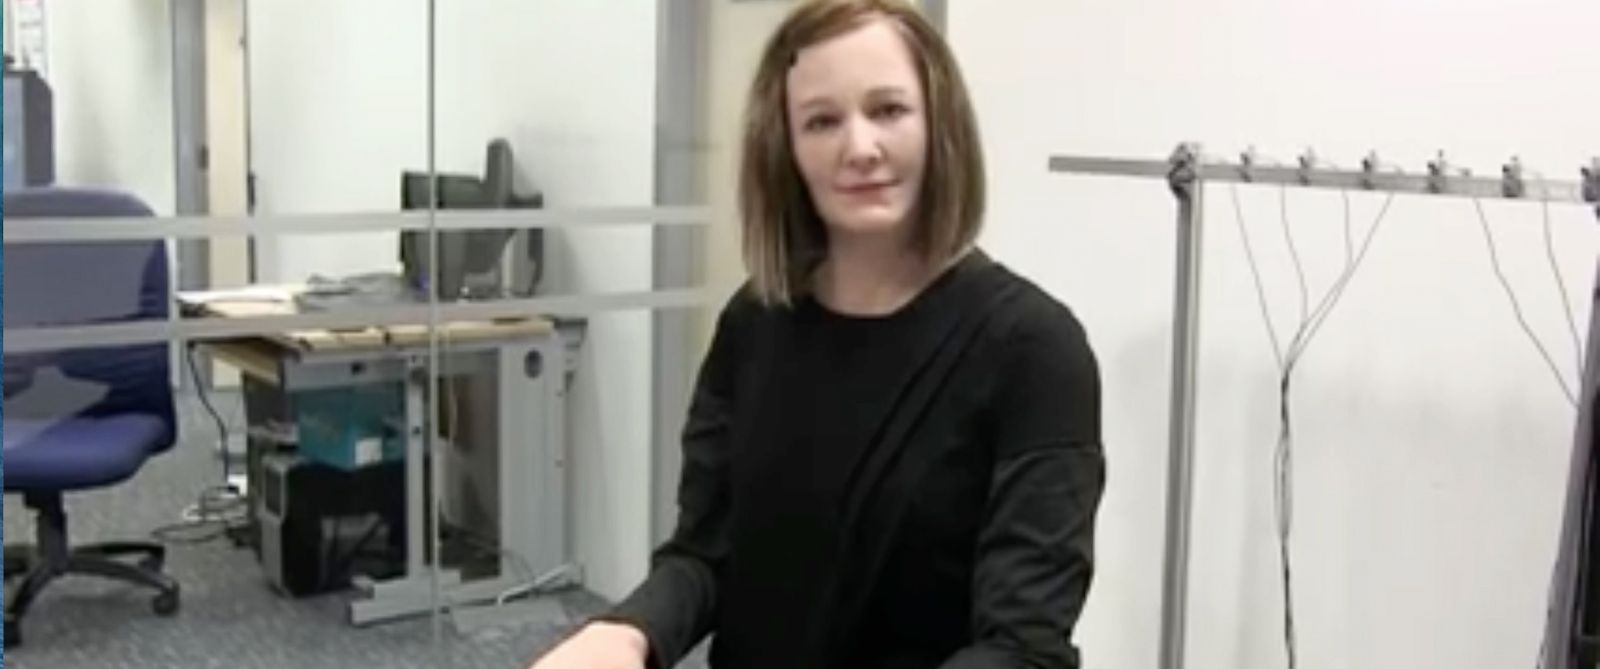 Human-Like Robot ‘Nadine’ Who Has a ‘Personality, Mood and Emotions’ Unveiled